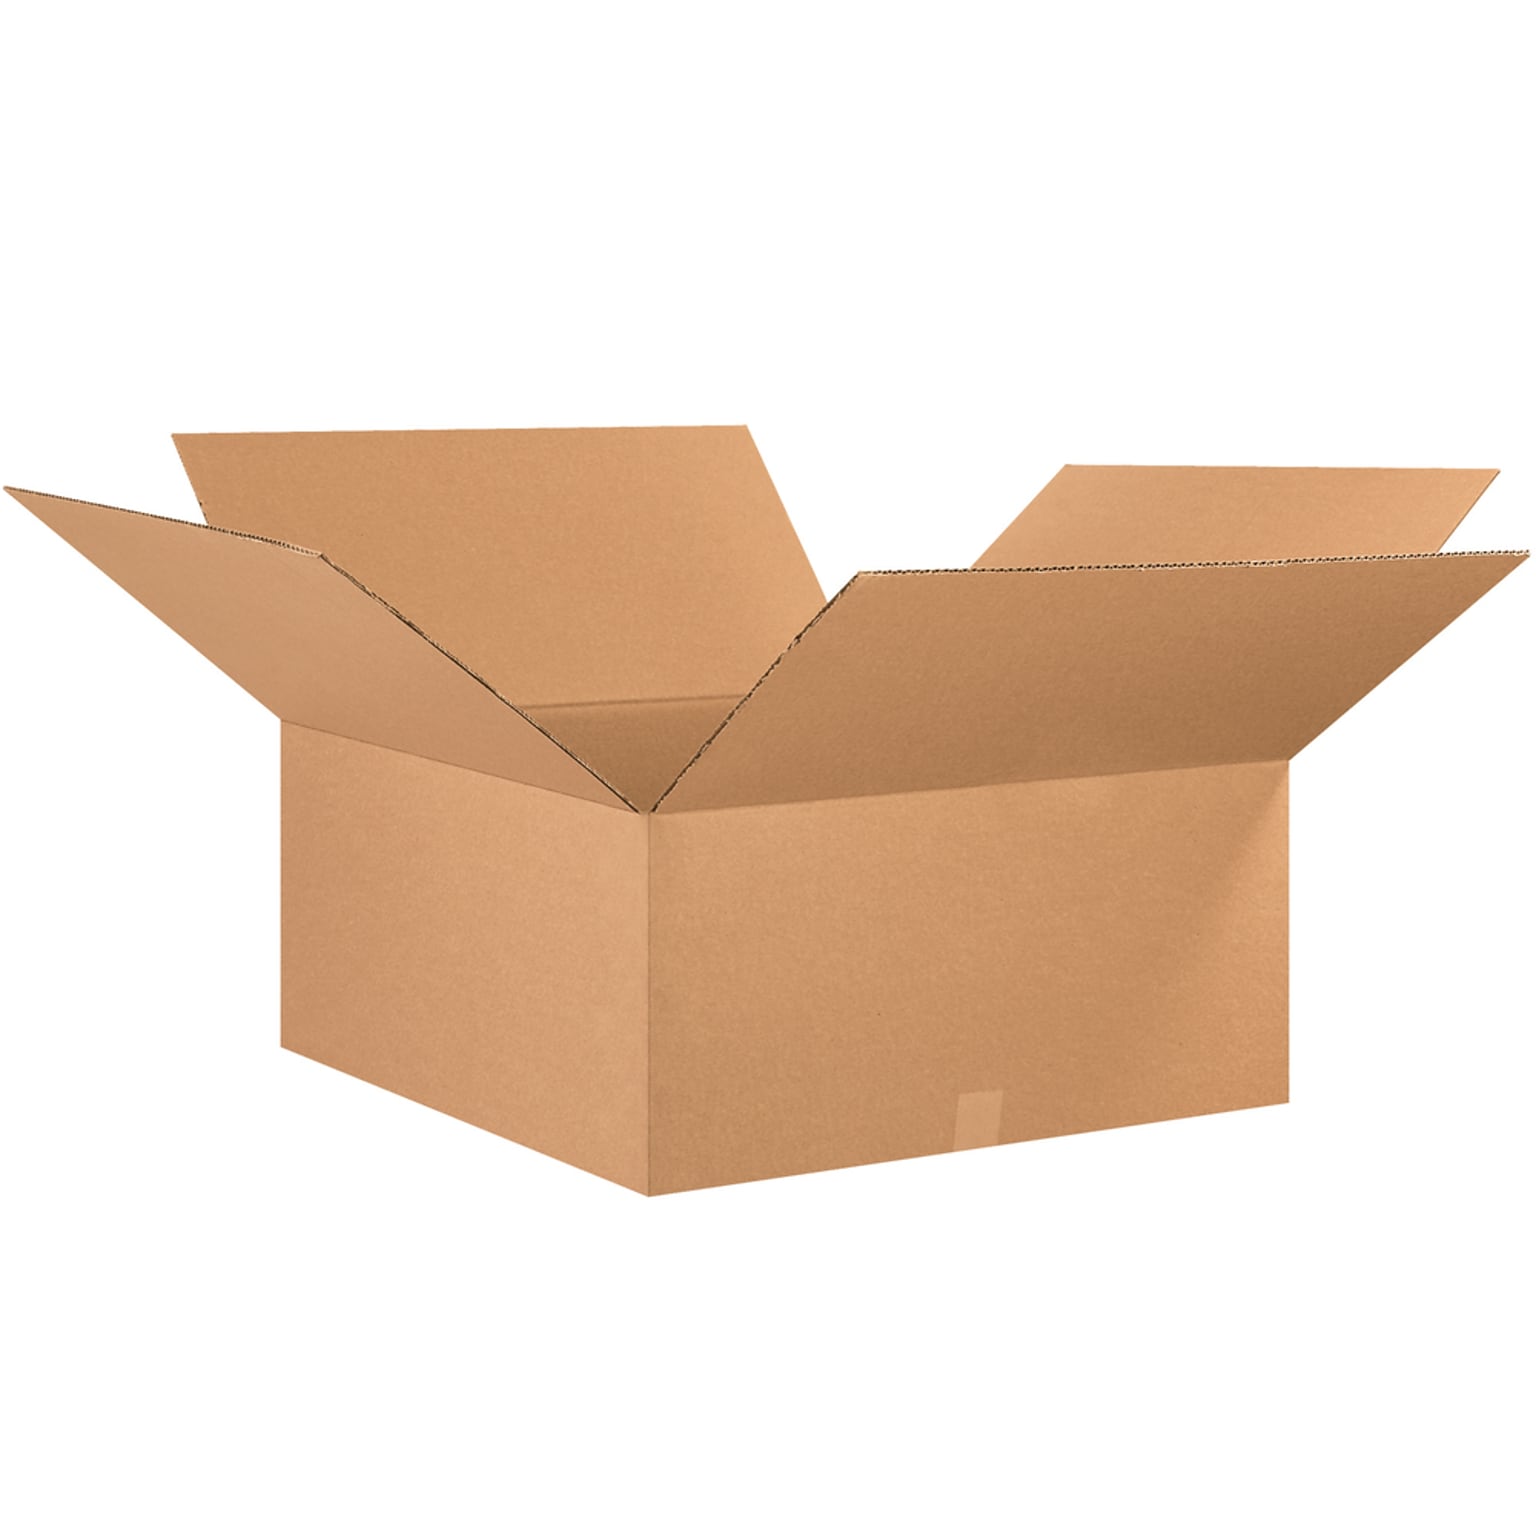 SI Products 26 x 26 x 12 Corrugated Shipping Boxes, 200#/ECT-32 Mullen Rated Corrugated, Pack of 10, (262612)